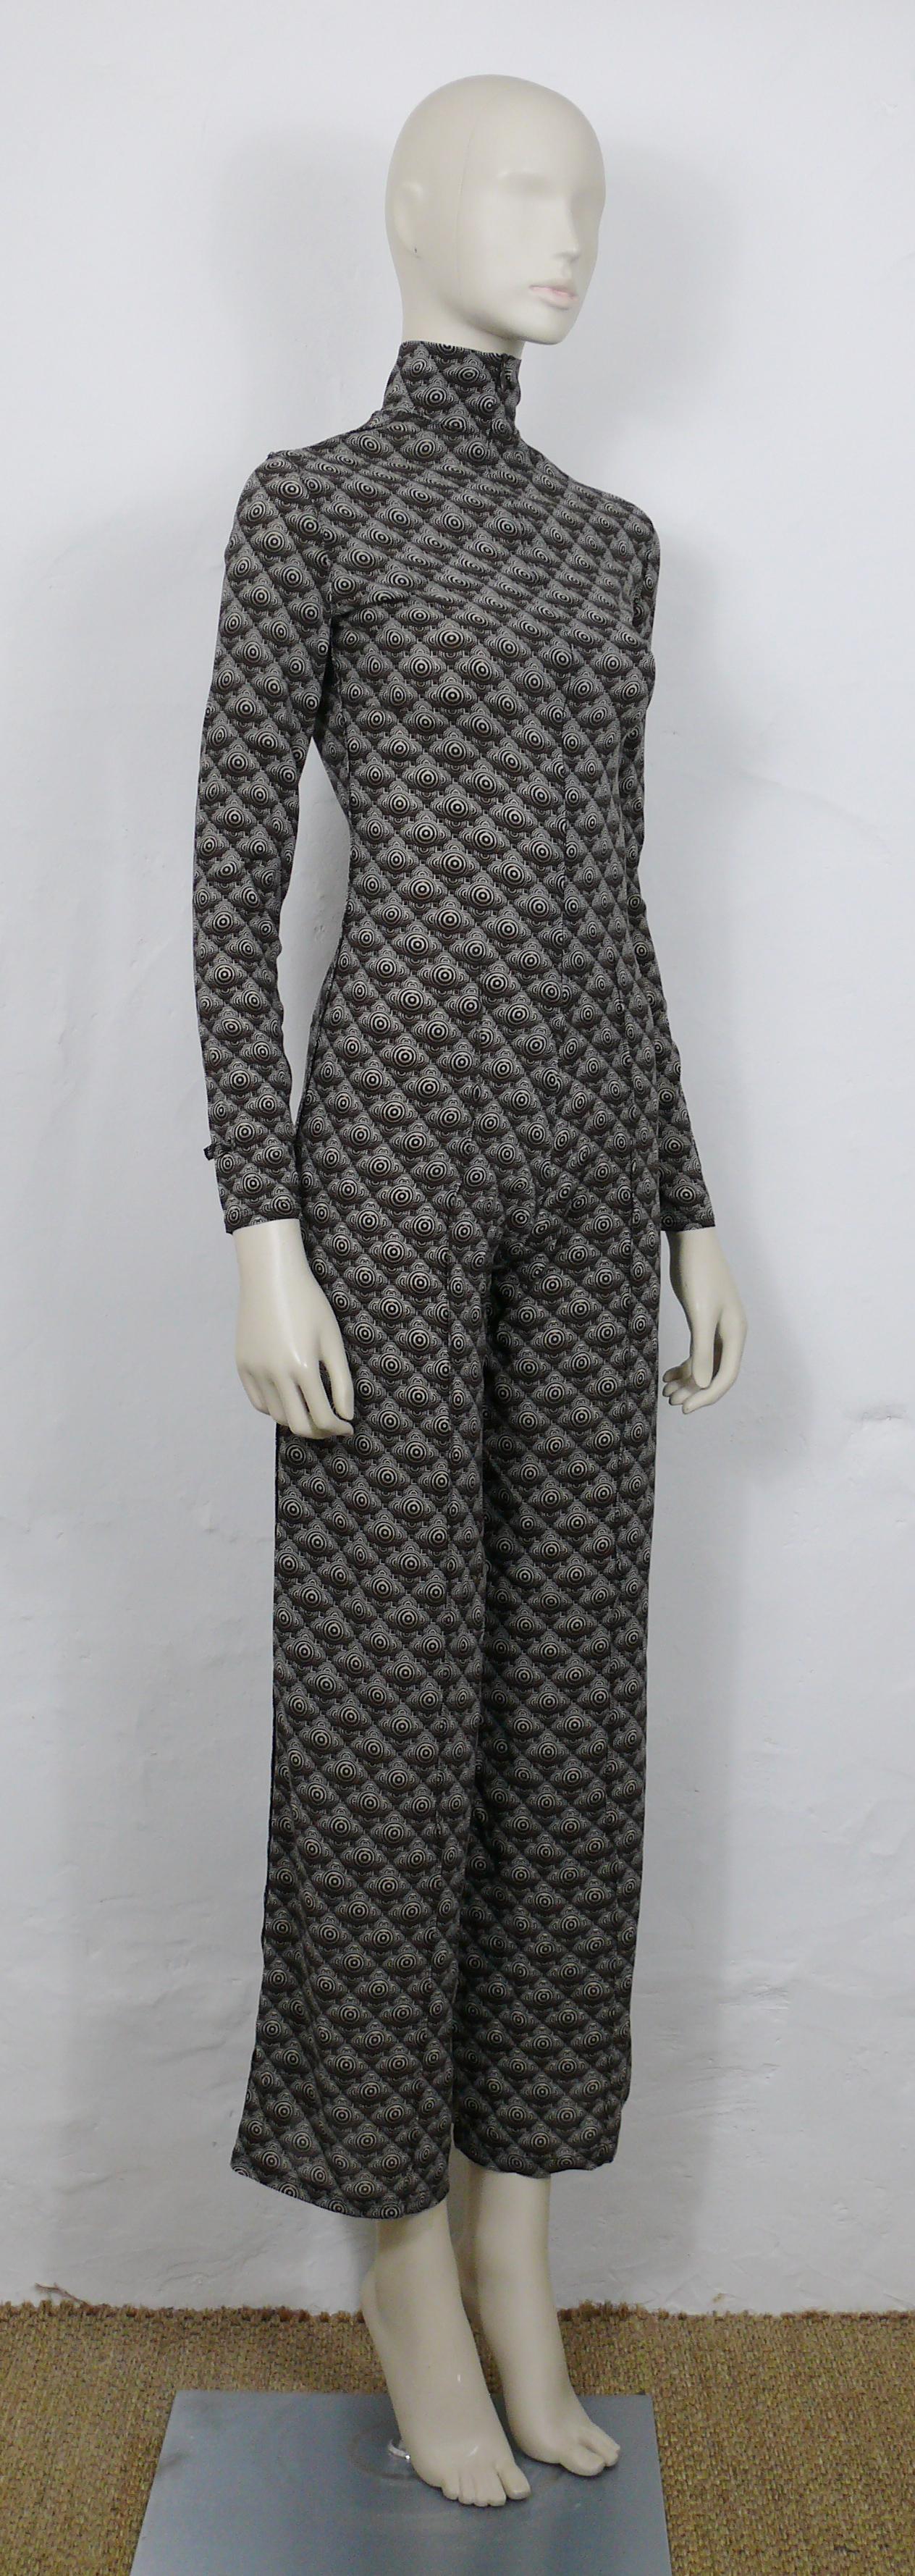 JEAN PAUL GAULTIER vintage long sleeve jumpsuit featuring an opulent brown/off-white abstract Op Art print all over.

This jumpsuit features :
- Long sleeves.
- Wide legs.
- Lightweight fabric.
- Has some stretch.
- Front zip closure.
-